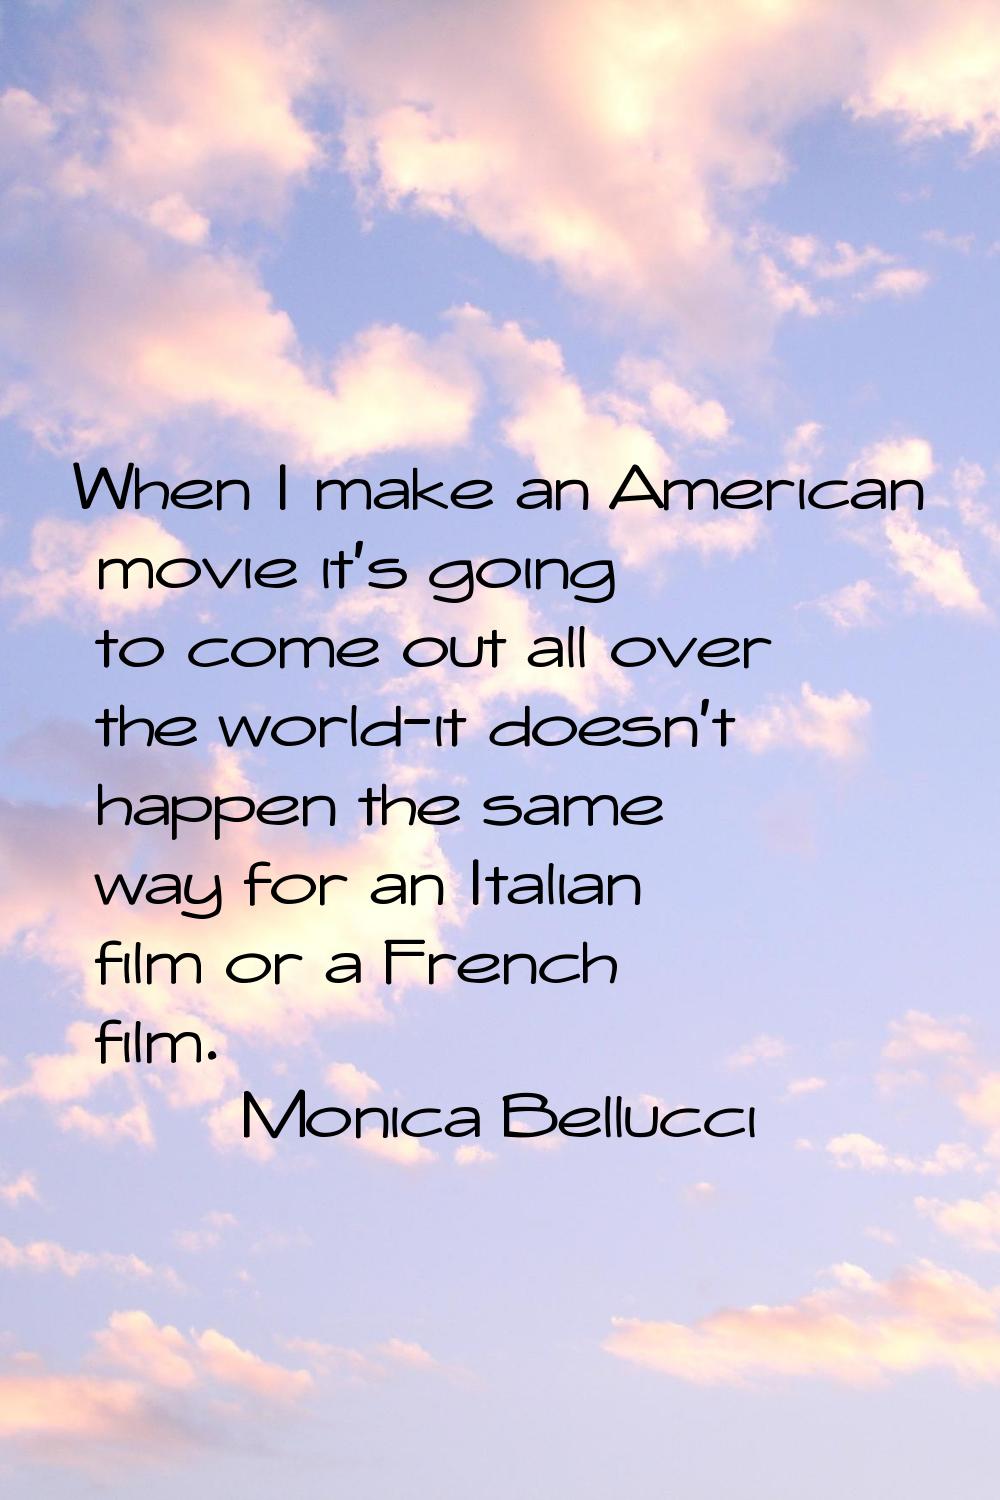 When I make an American movie it's going to come out all over the world-it doesn't happen the same 